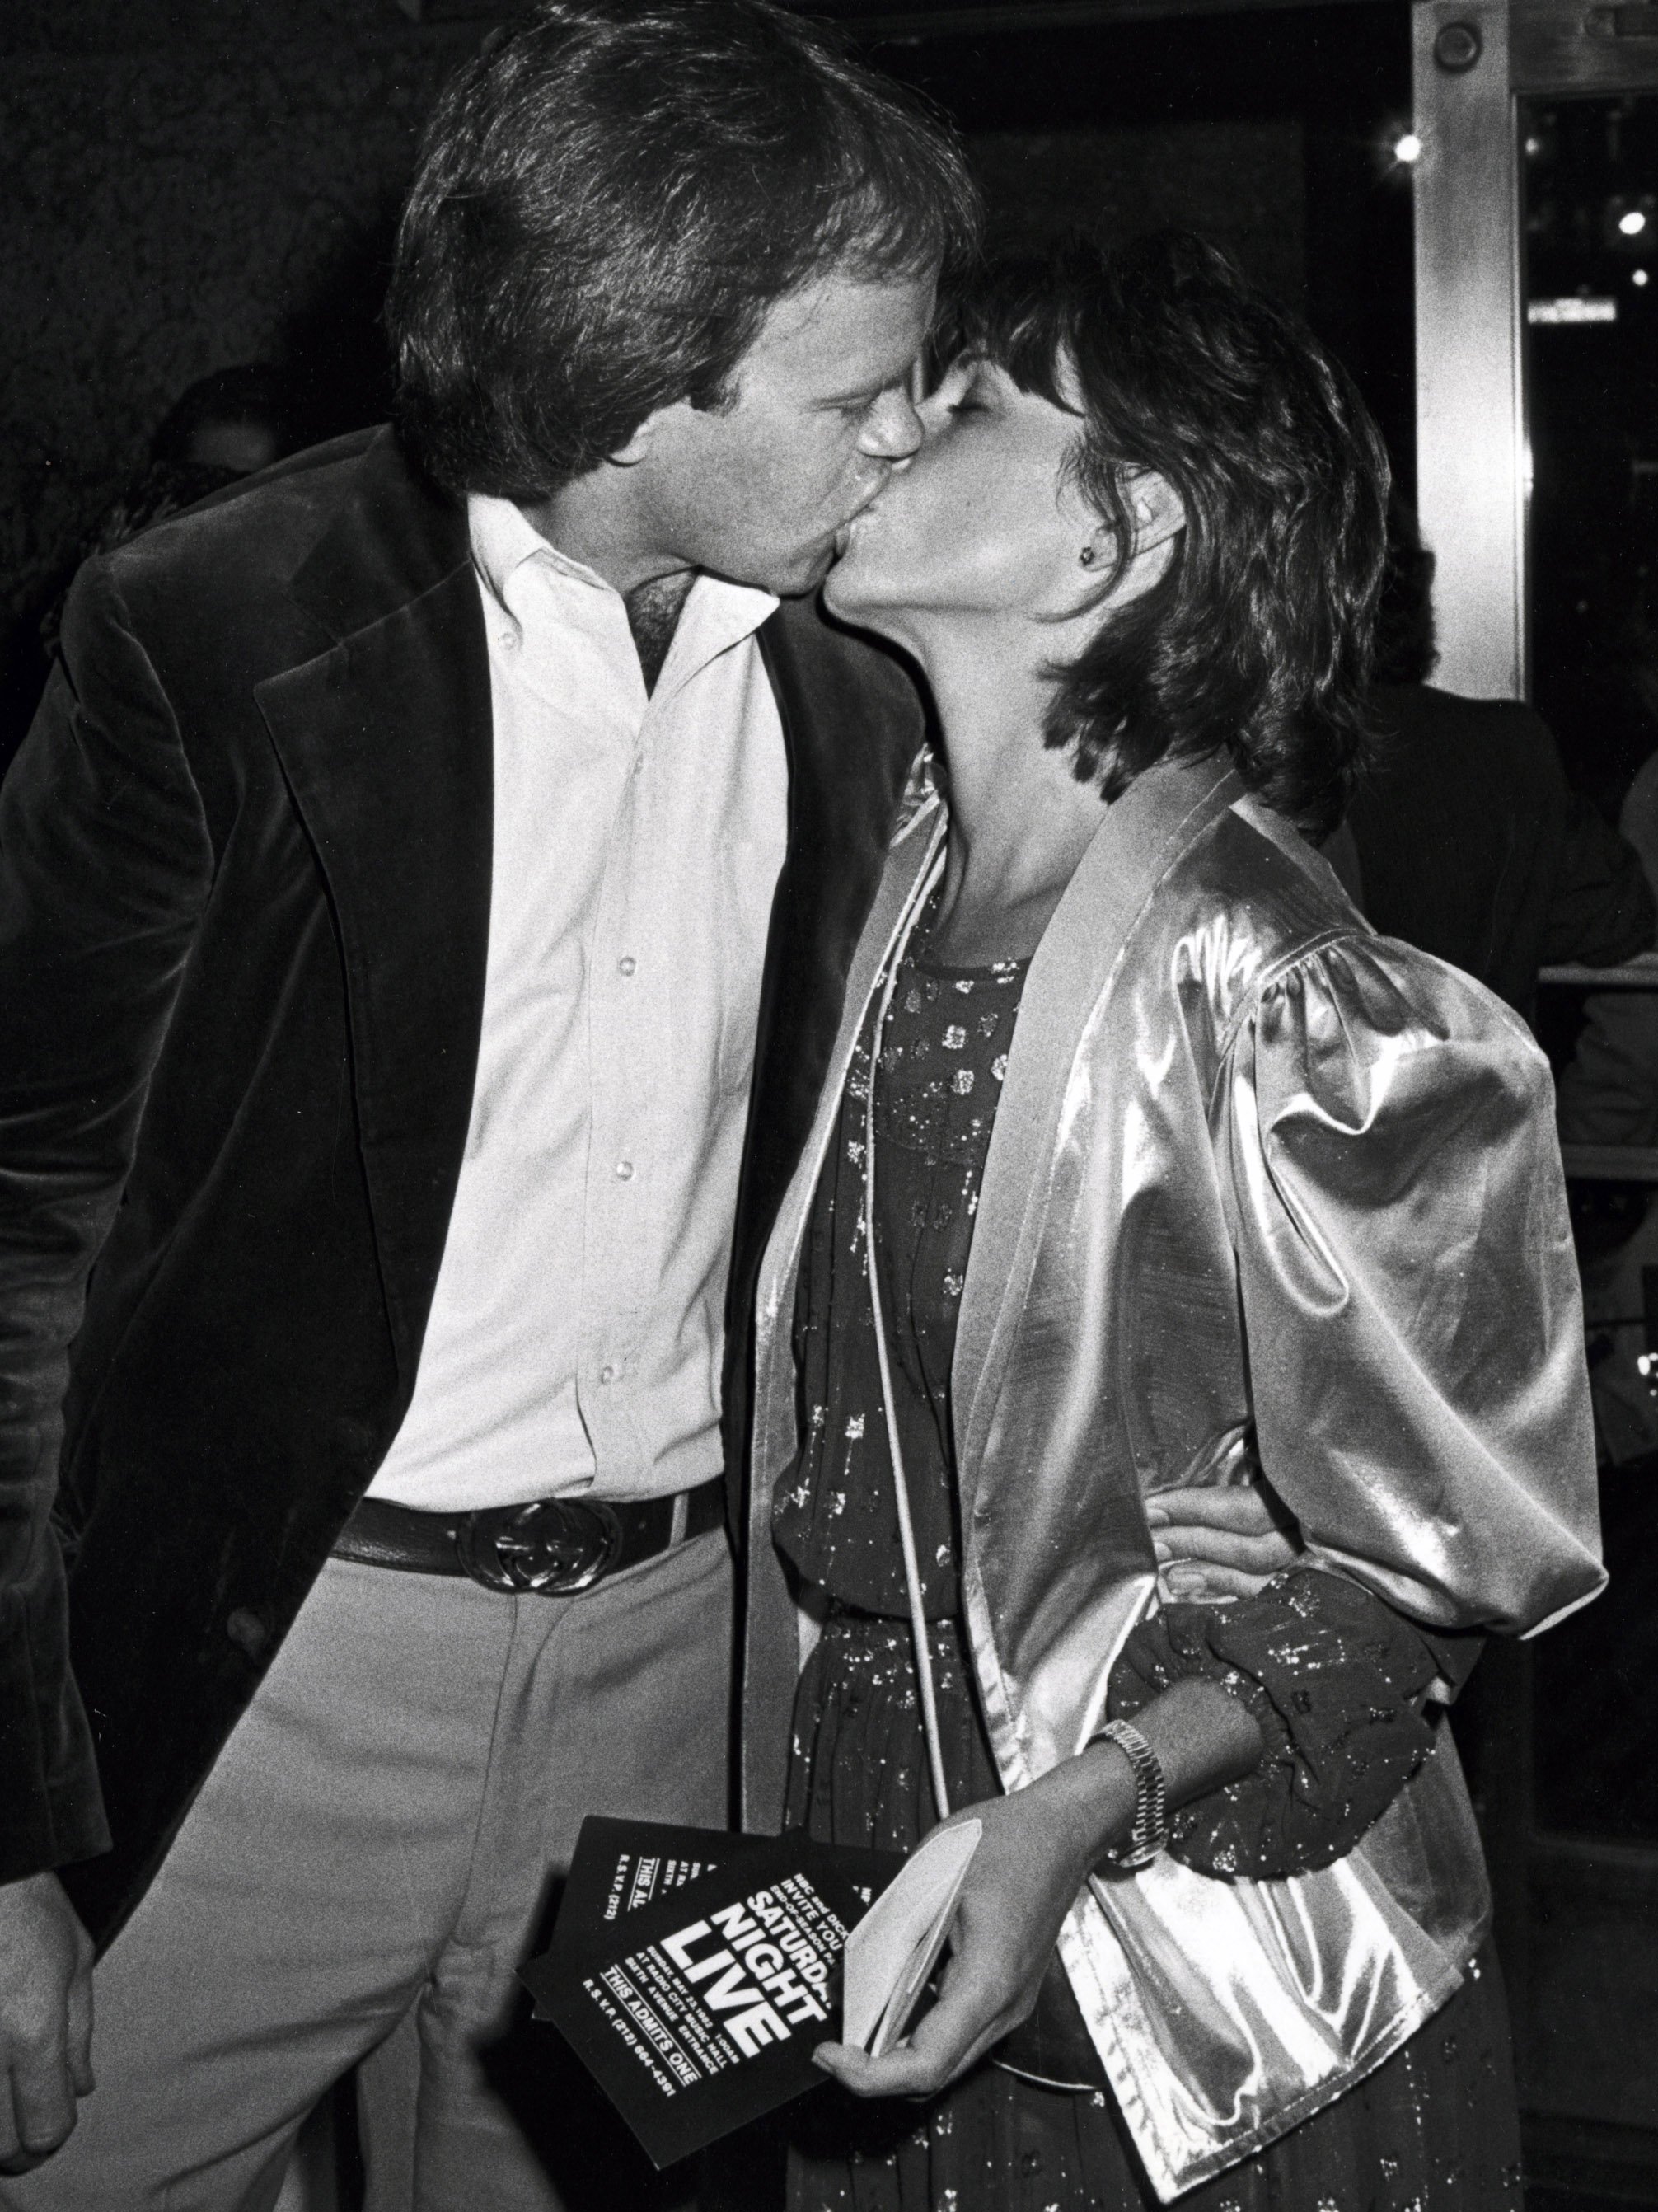 Producer Dick Ebersol and Susan Saint James attend "Saturday Night Live" party for Olivia Newton-John on May 22, 1982 at Radio City Music Hall in New York City. Photo: Getty Images